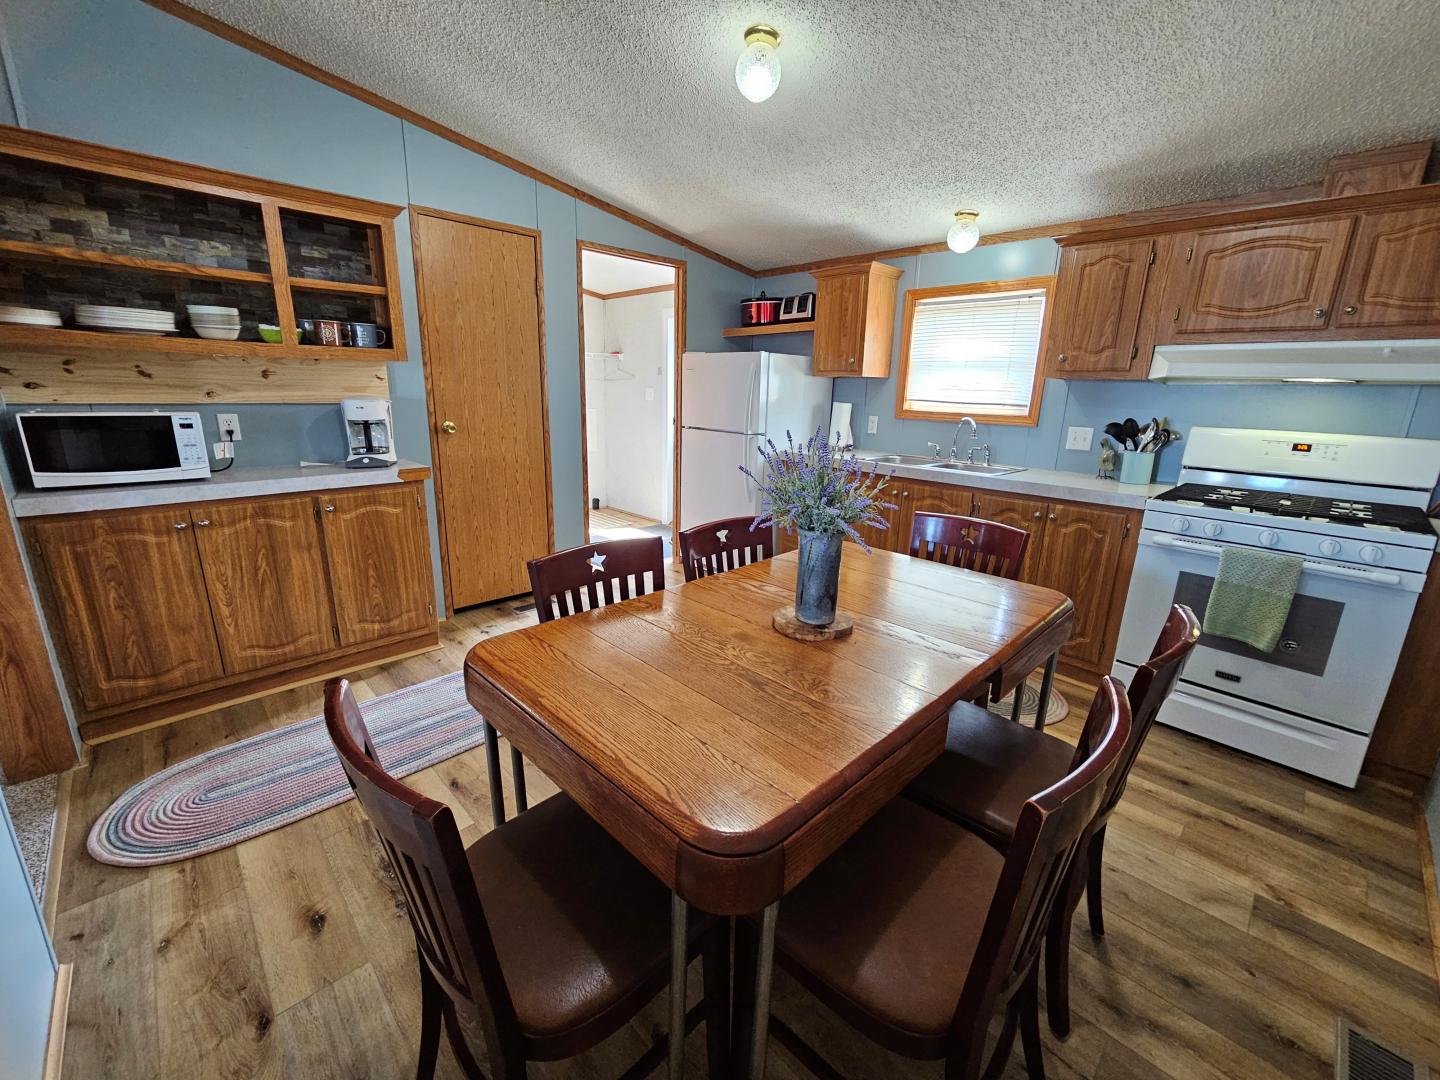 Wide angle view of dining room and kitchen area